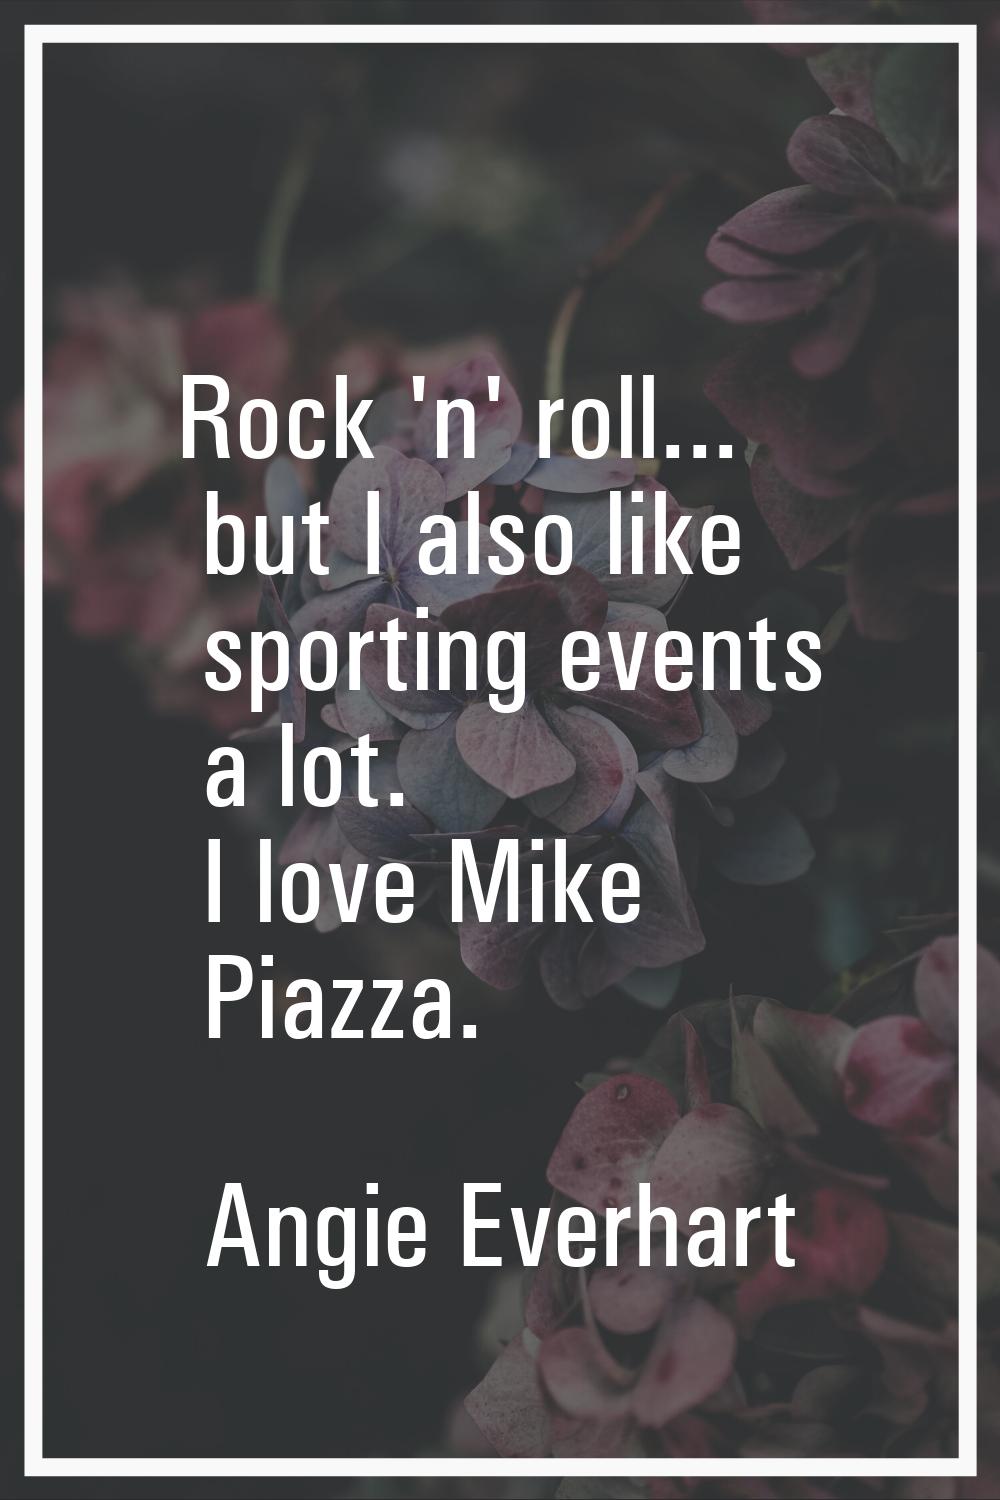 Rock 'n' roll... but I also like sporting events a lot. I love Mike Piazza.